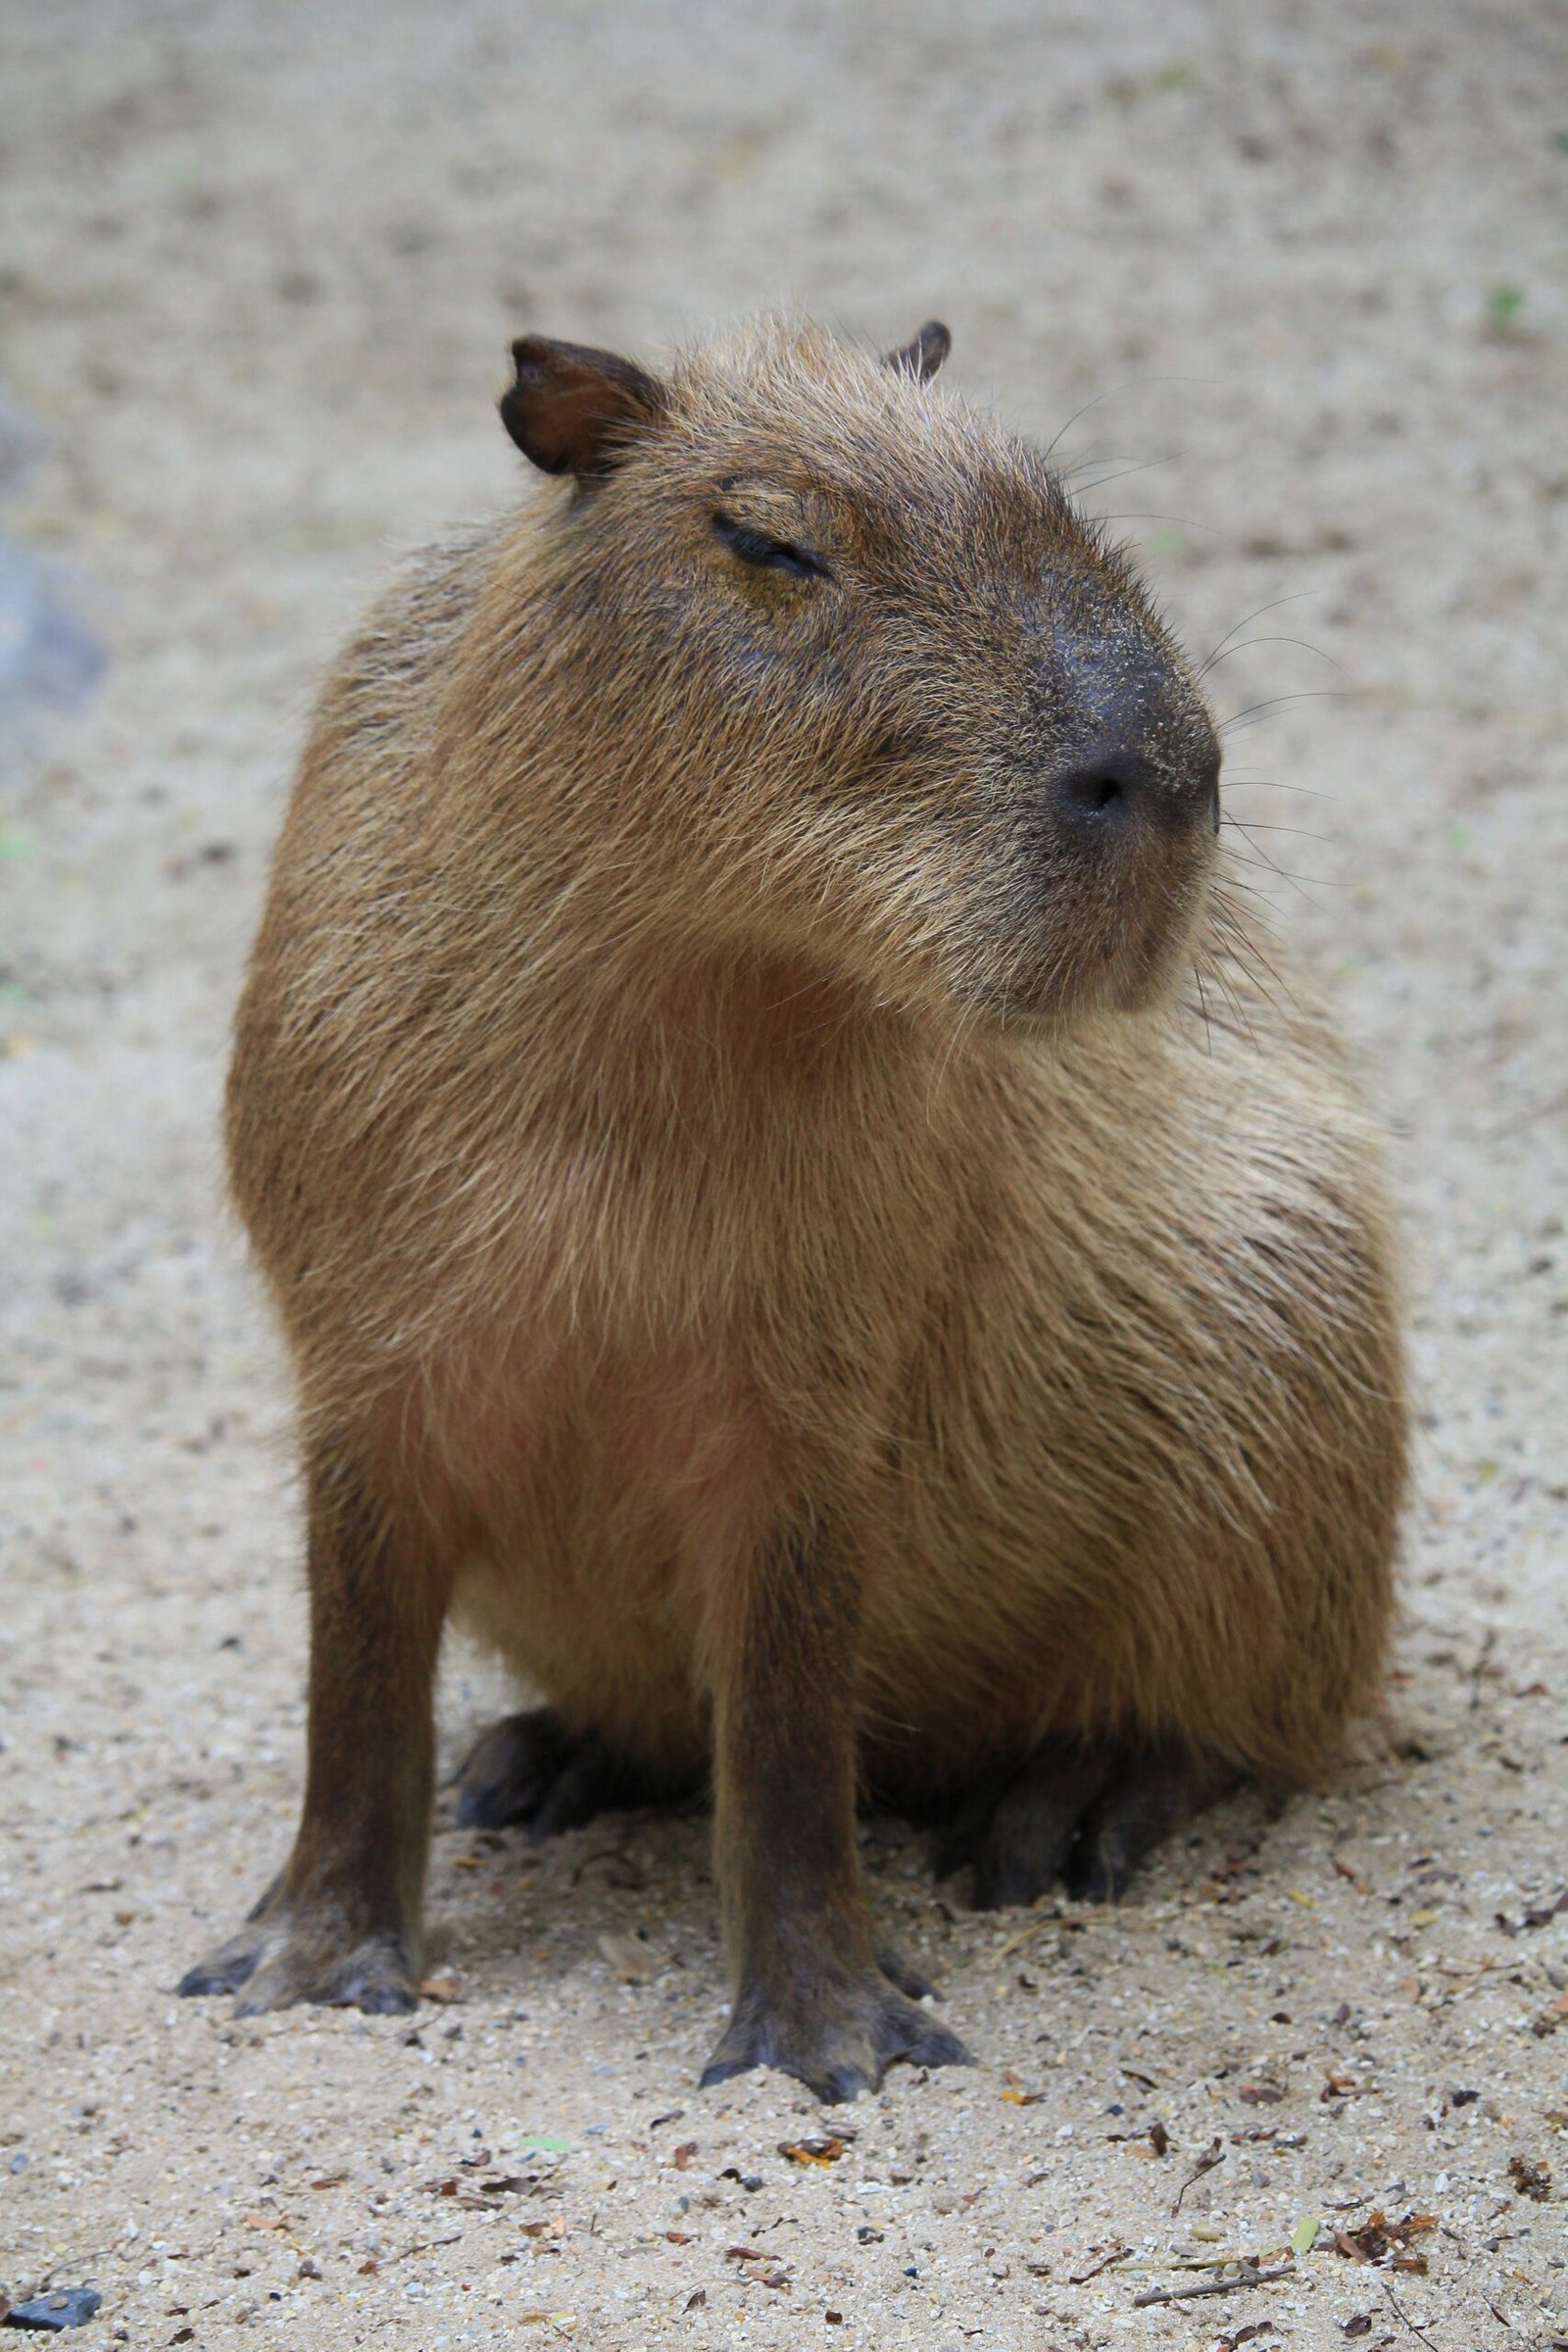 Is owning a capybara legal in Scotland?